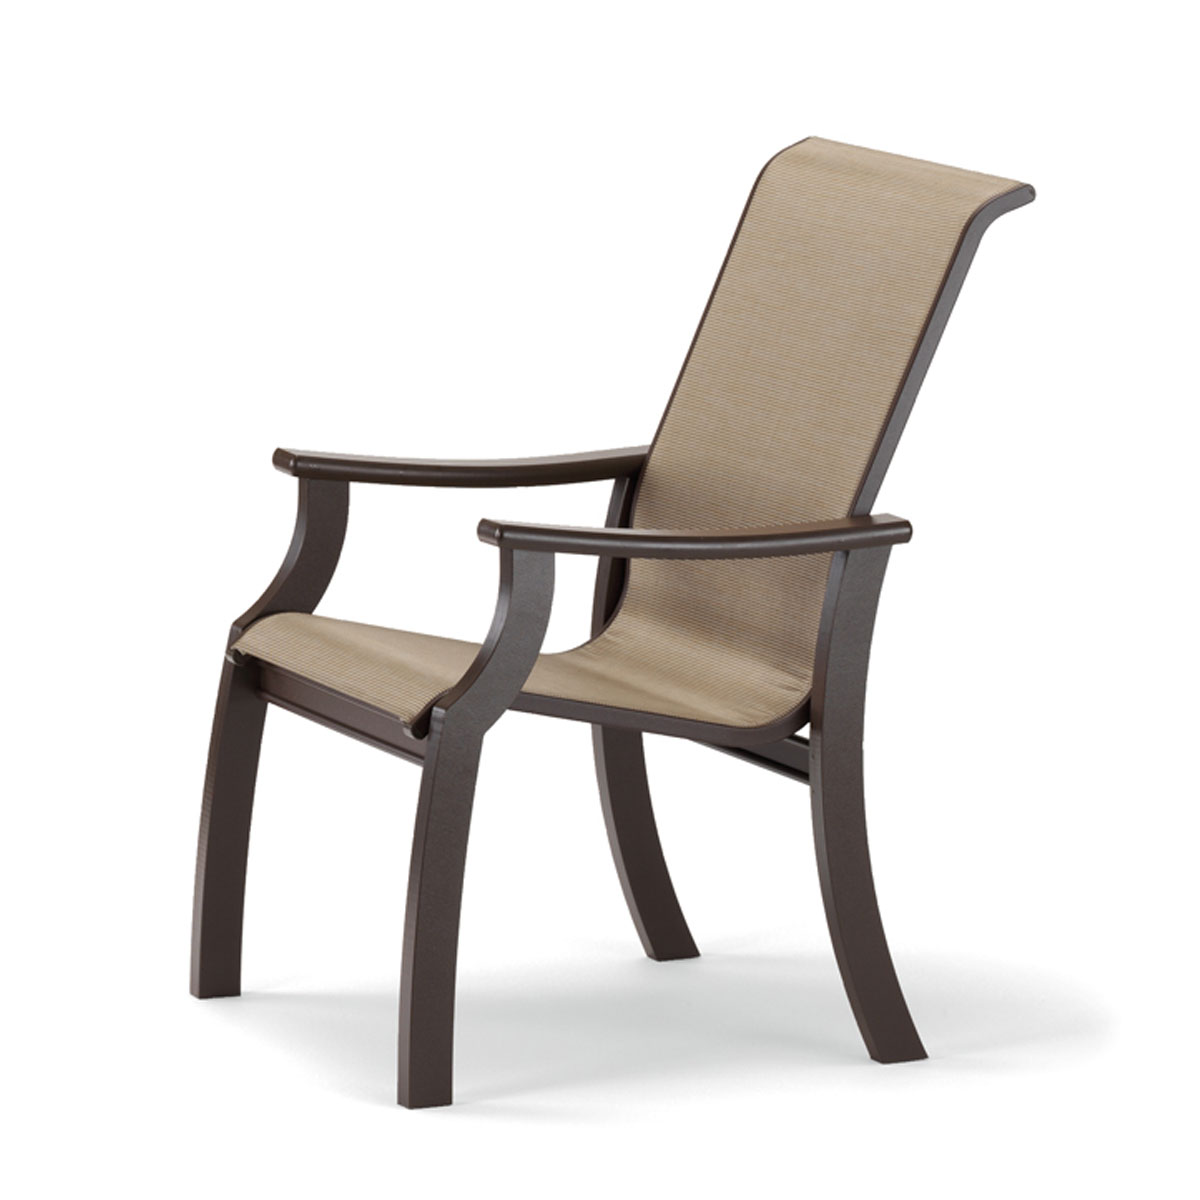 Telescope Casual St. Catherine MGP Sling Arm Chair with MGP Arms